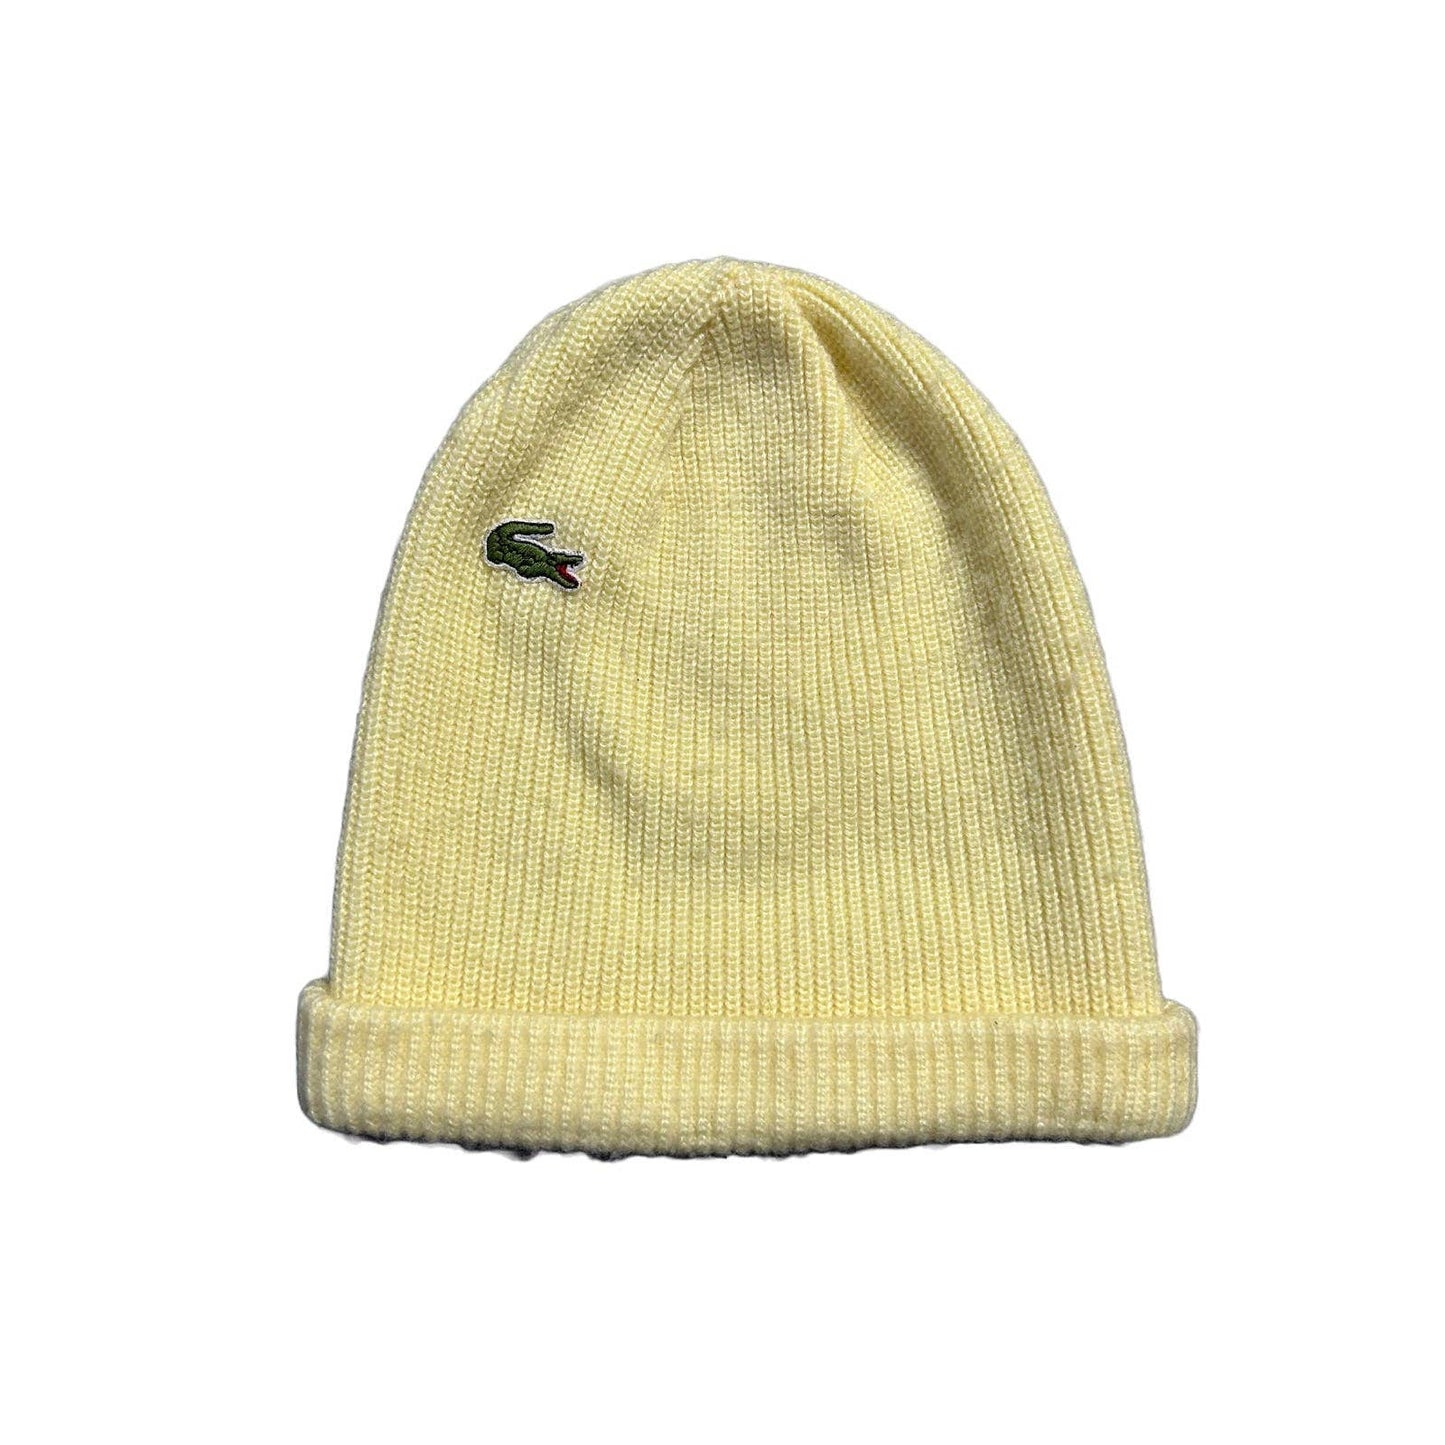 Vintage Lacoste Beanie Hat Made in France yellow